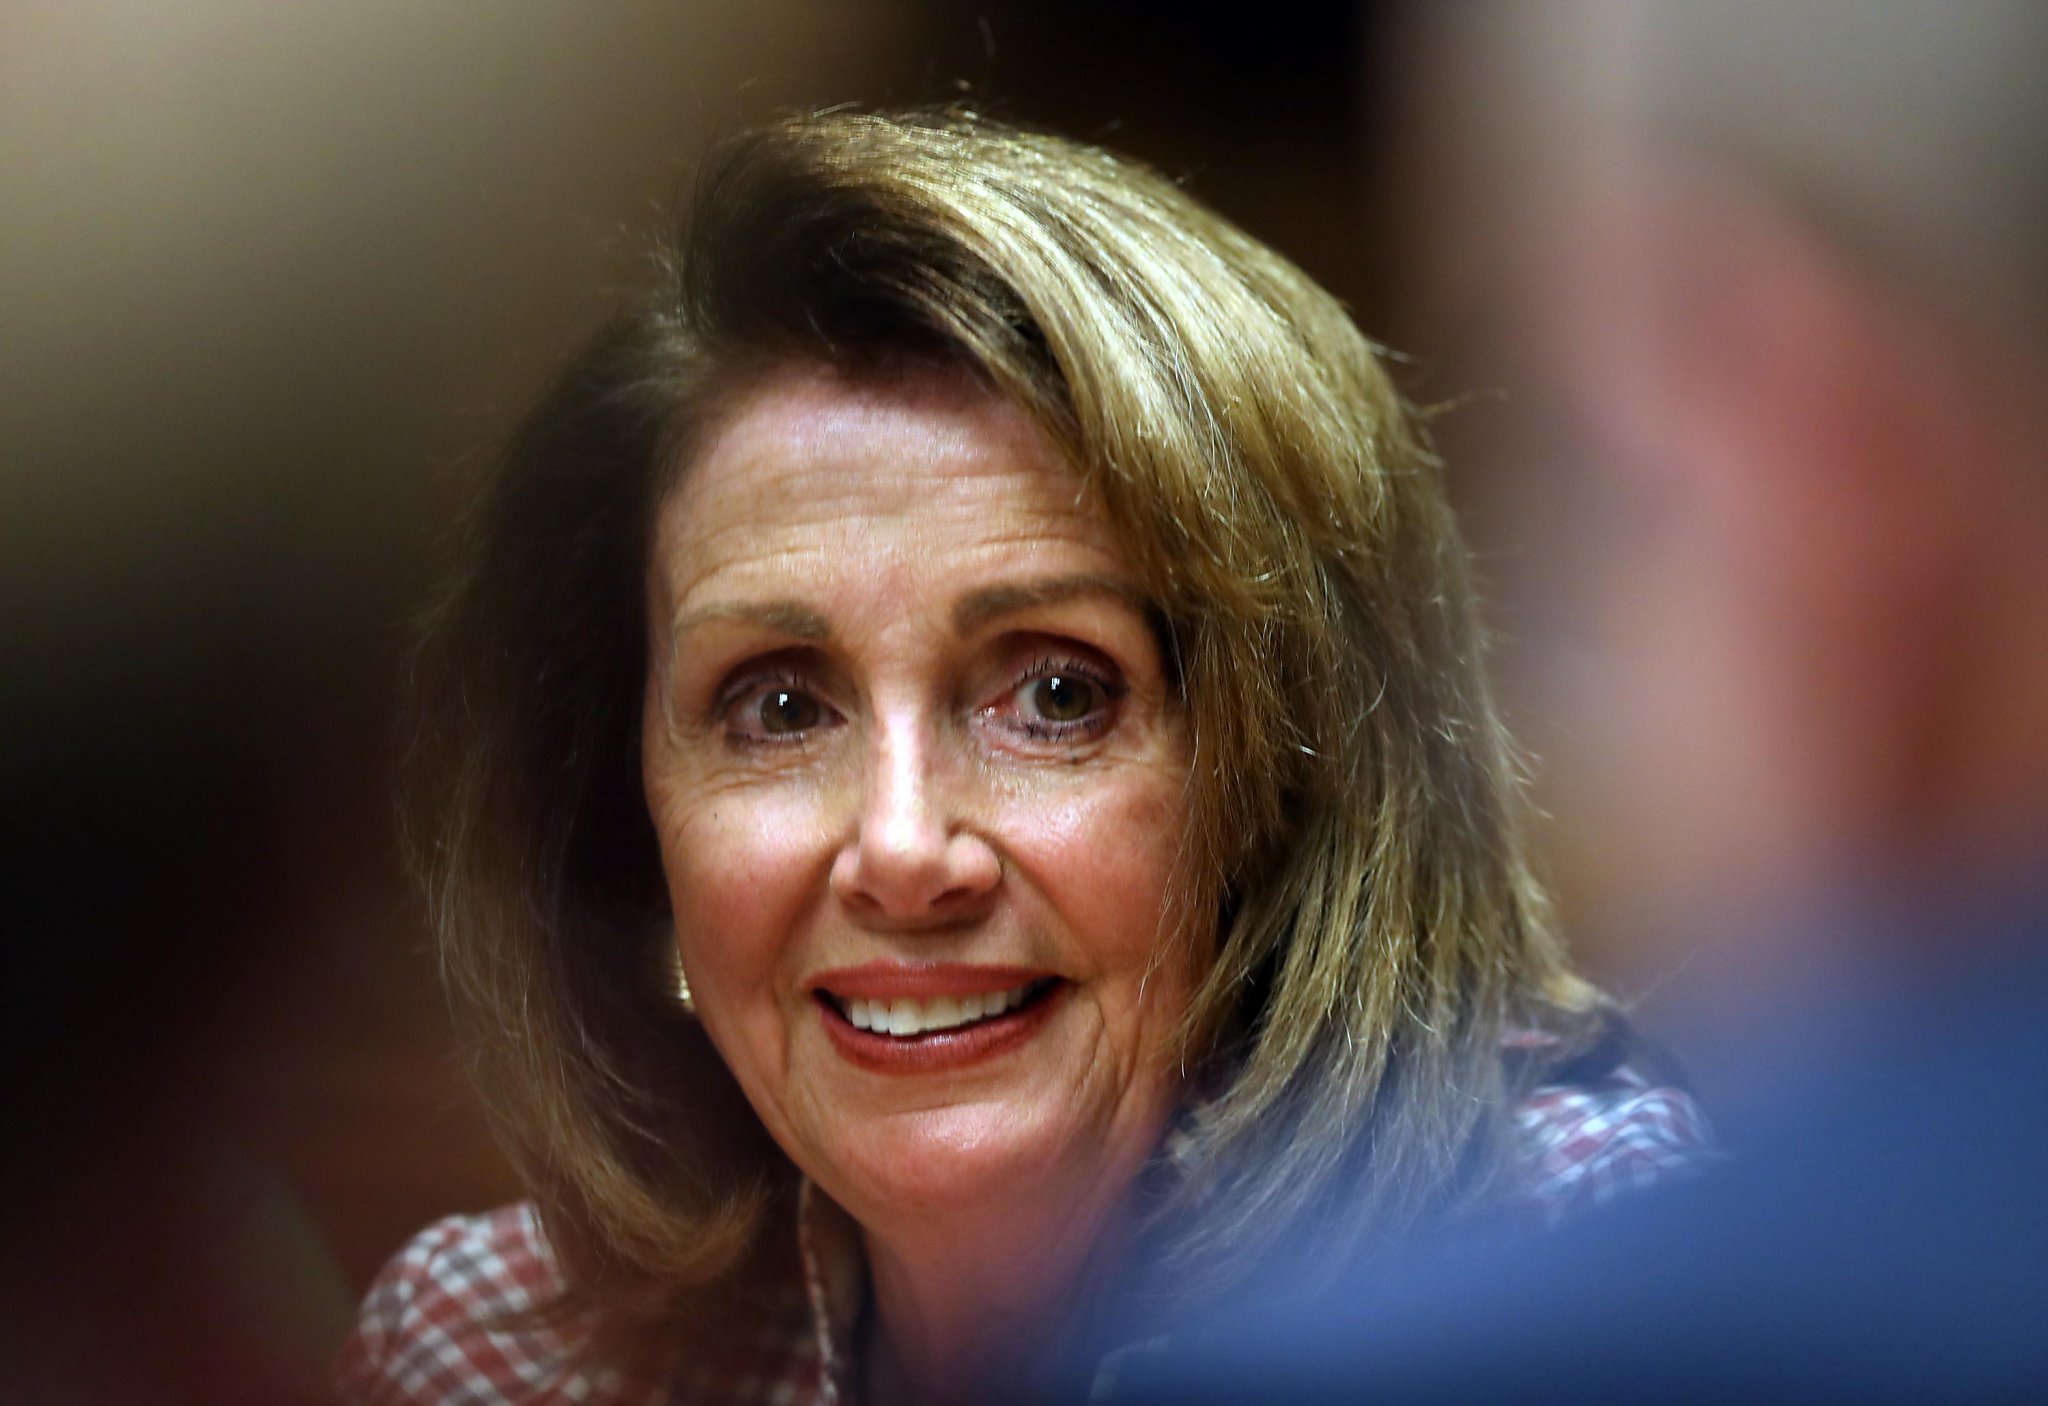 Nancy Pelosi says politicians could learn from drag queens, Trump 'lip